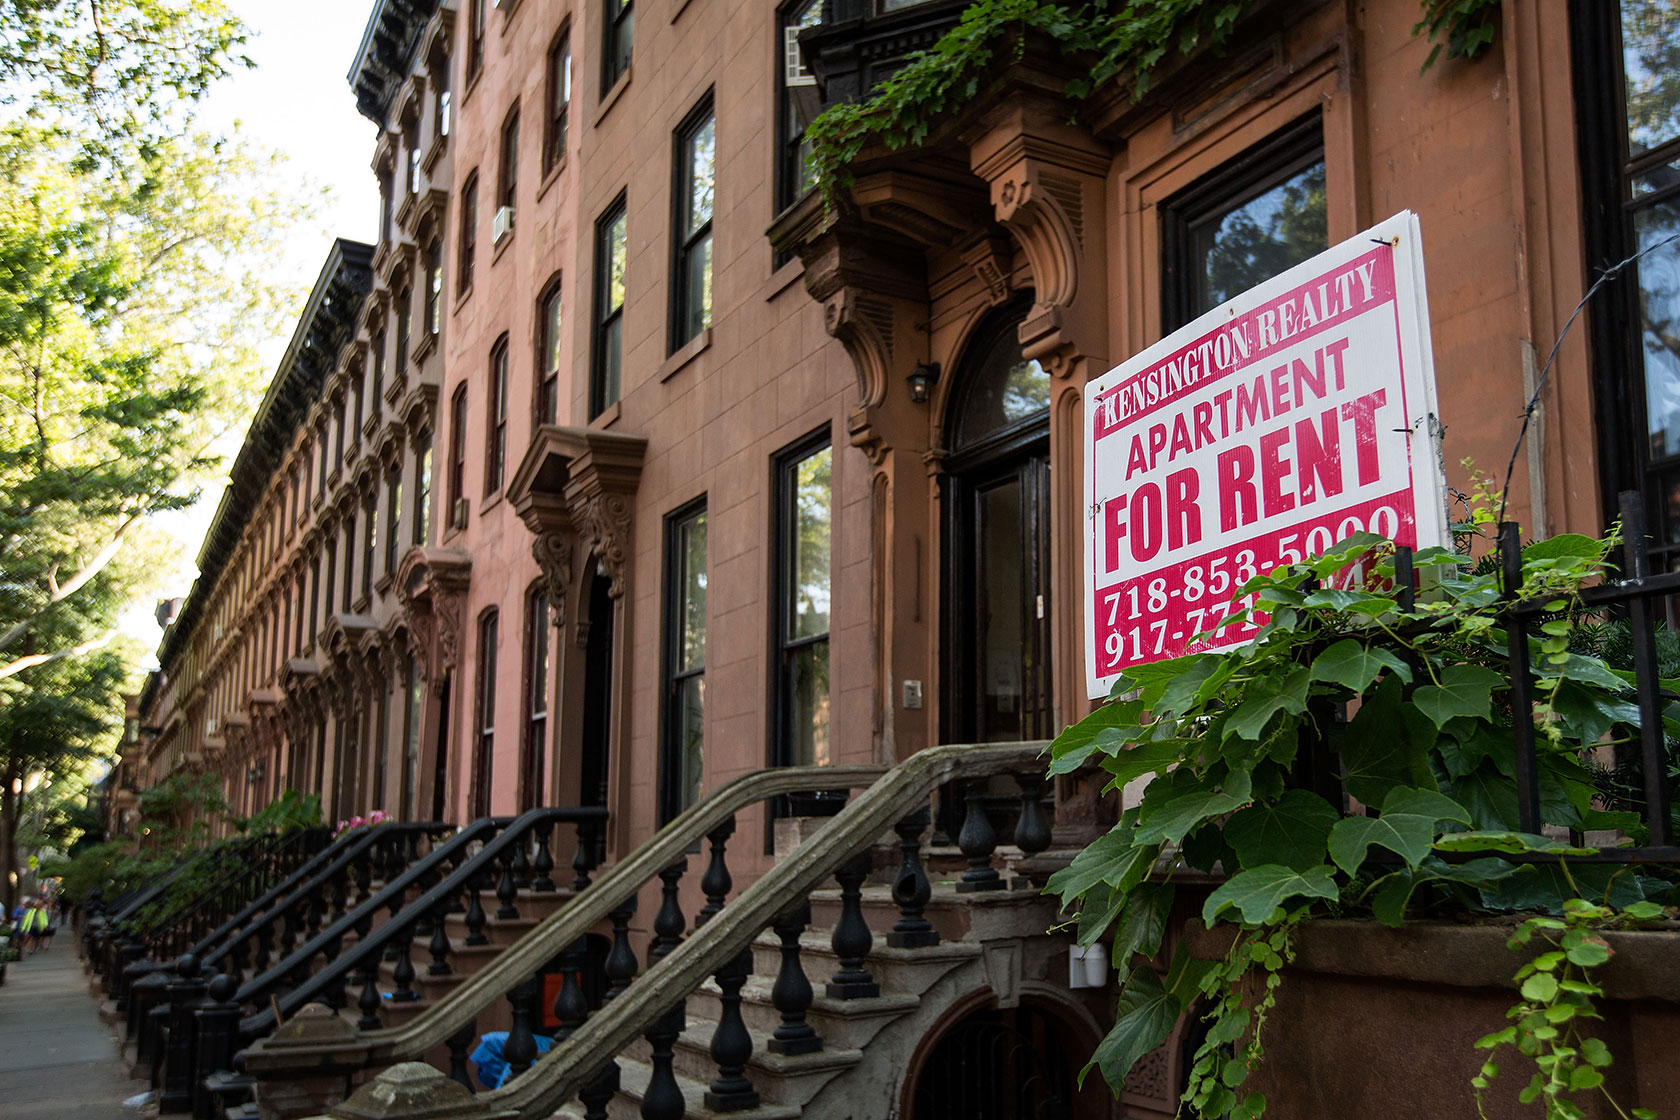 A sign advertises an apartment for rent in Brooklyn.